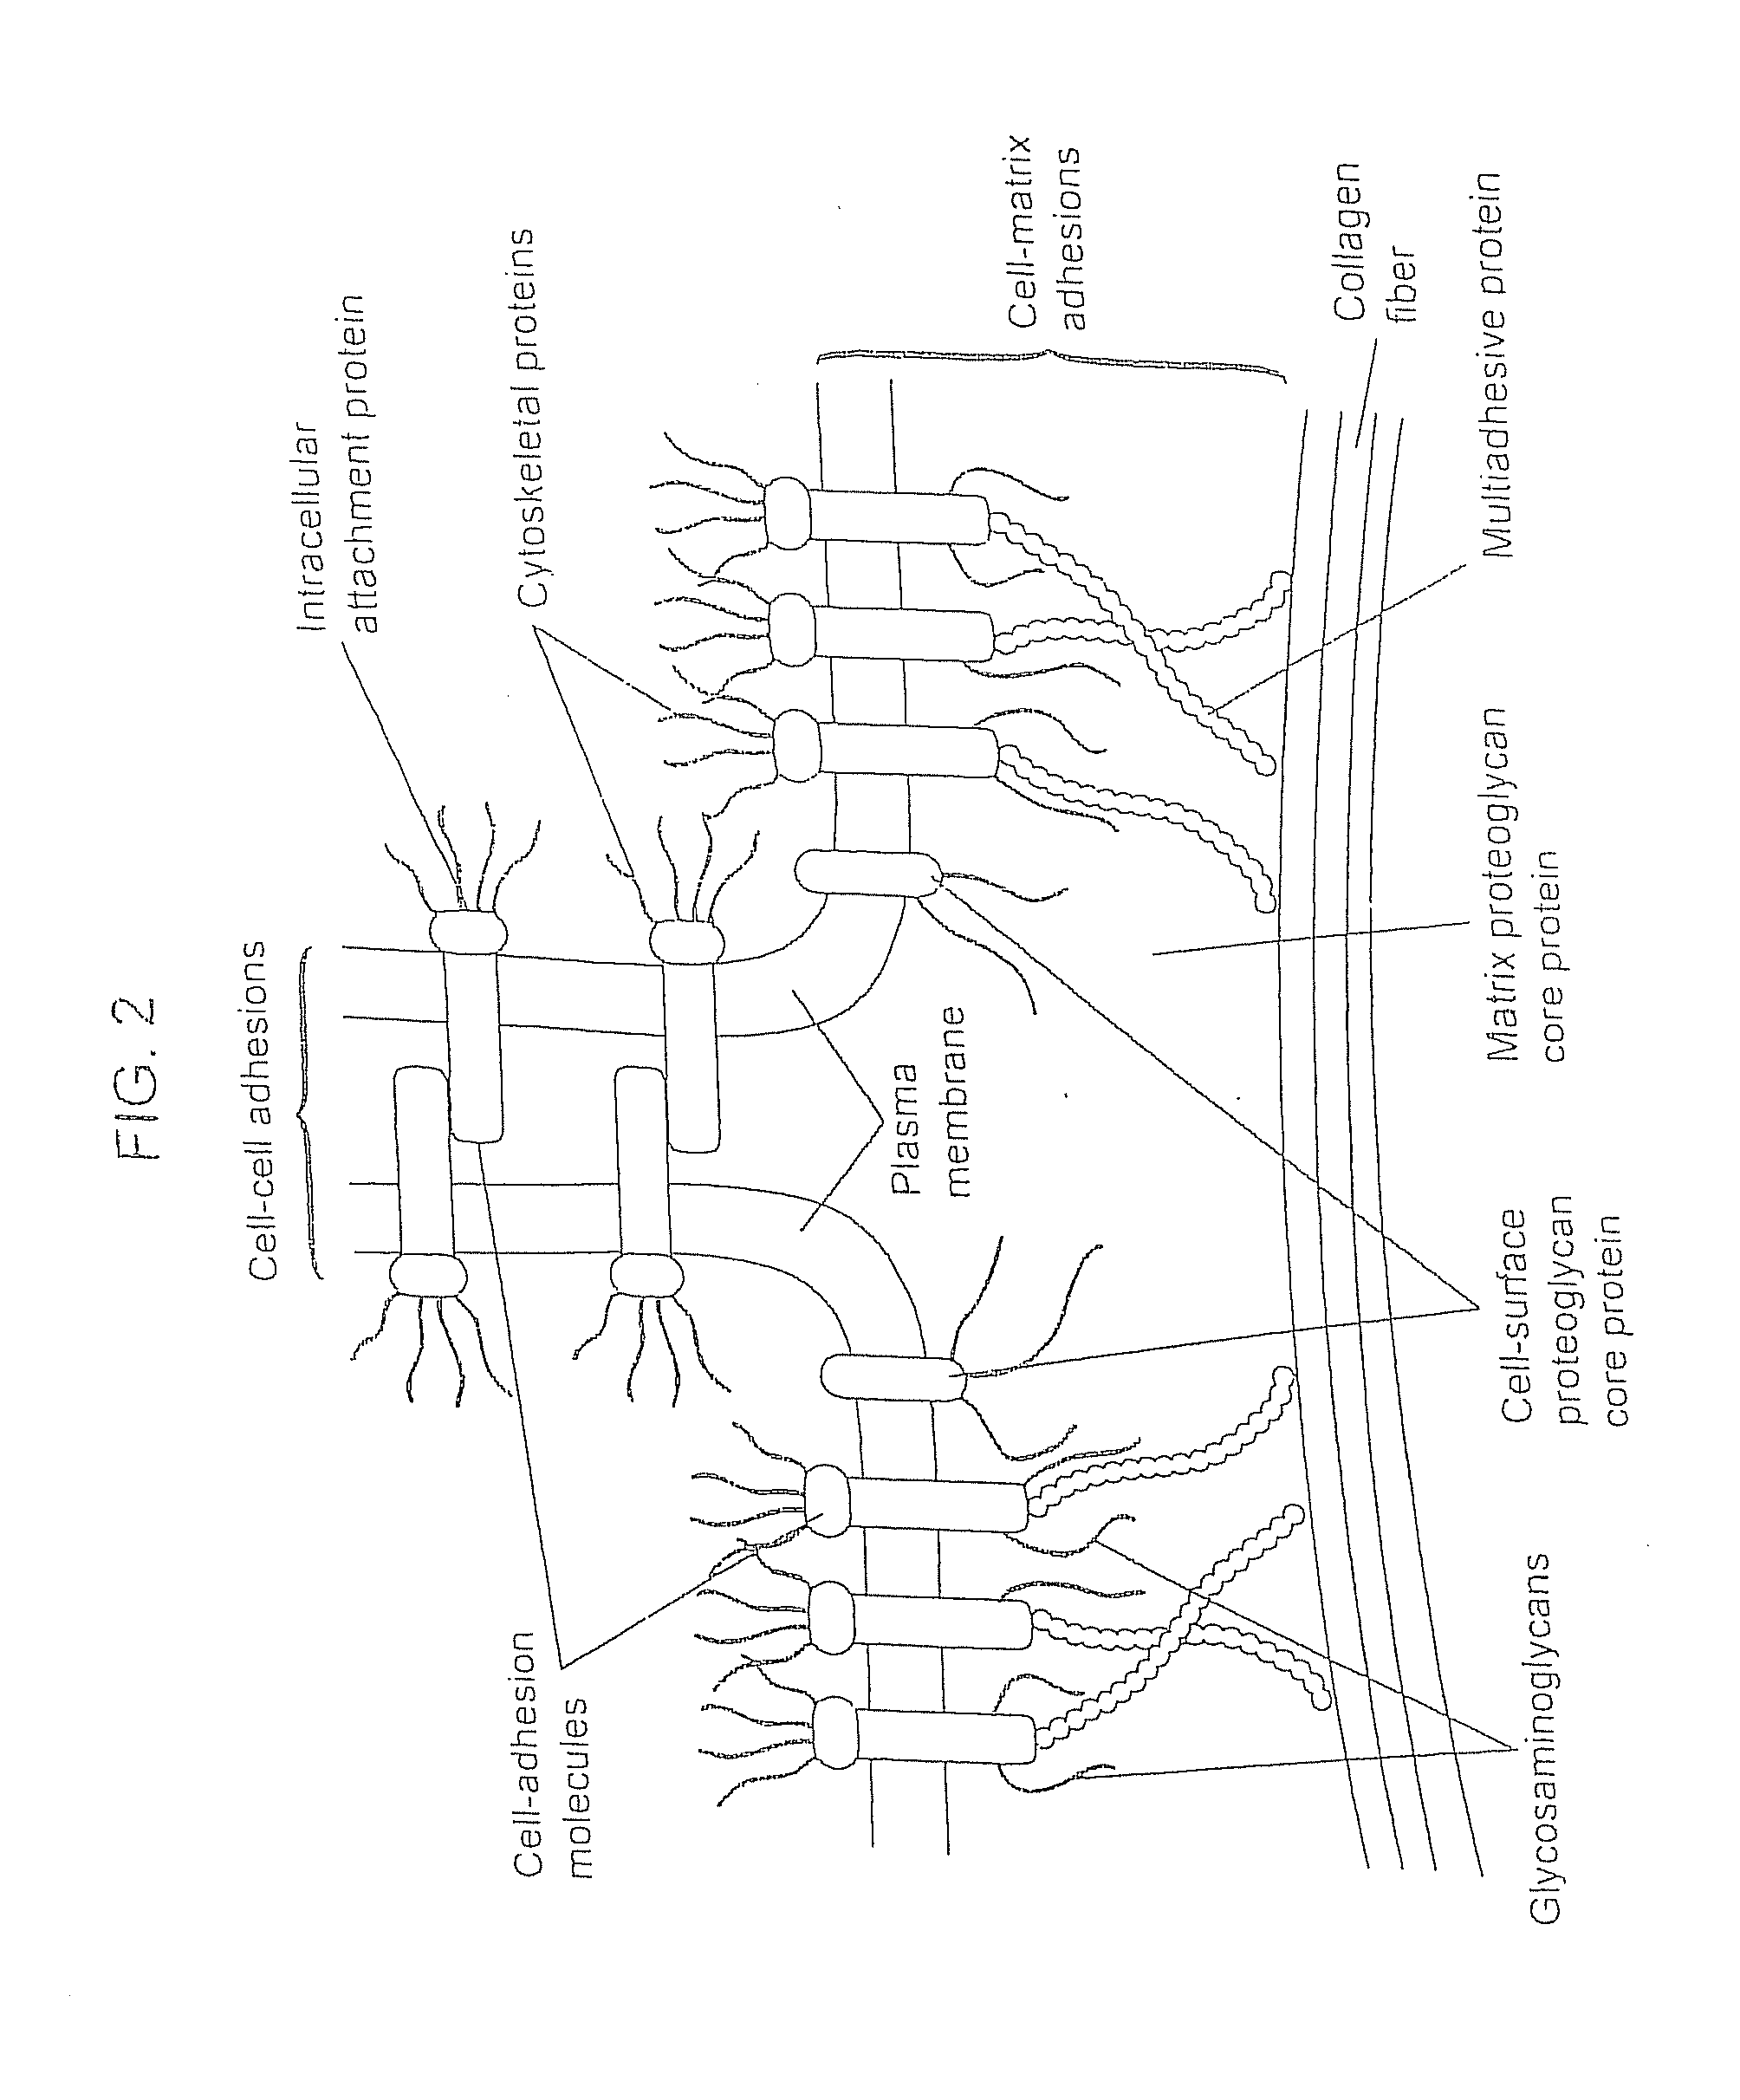 Compositions for Regenerating Defective or Absent Myocardium